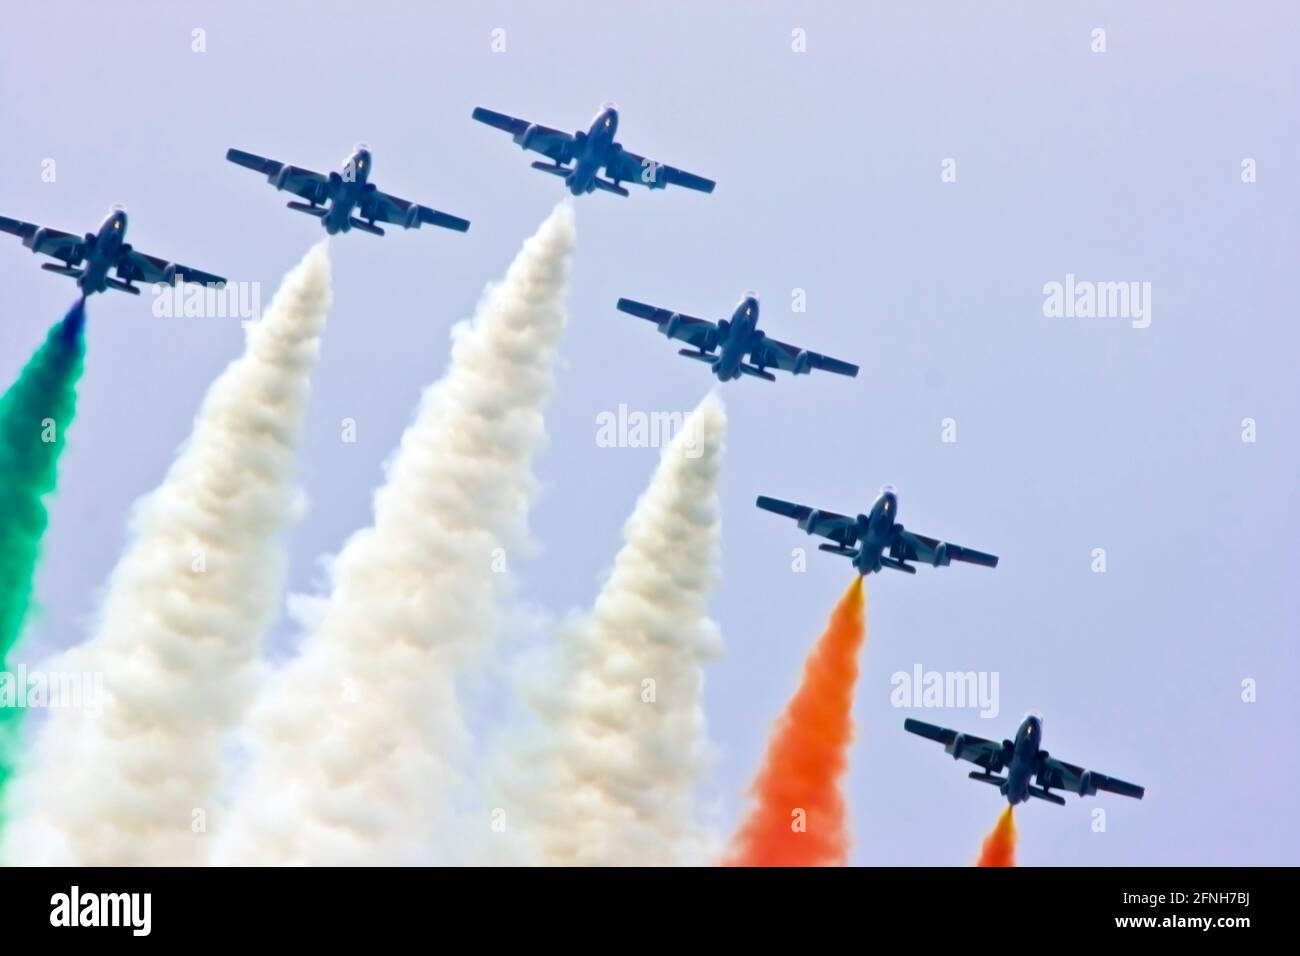 VIGNA DI VALLE, ROME, ITALY - JUNE 1, 2008: Tricolor flag of Italy drawn in the sky by the aerobatic team of the Italian Air Force. Stock Photo